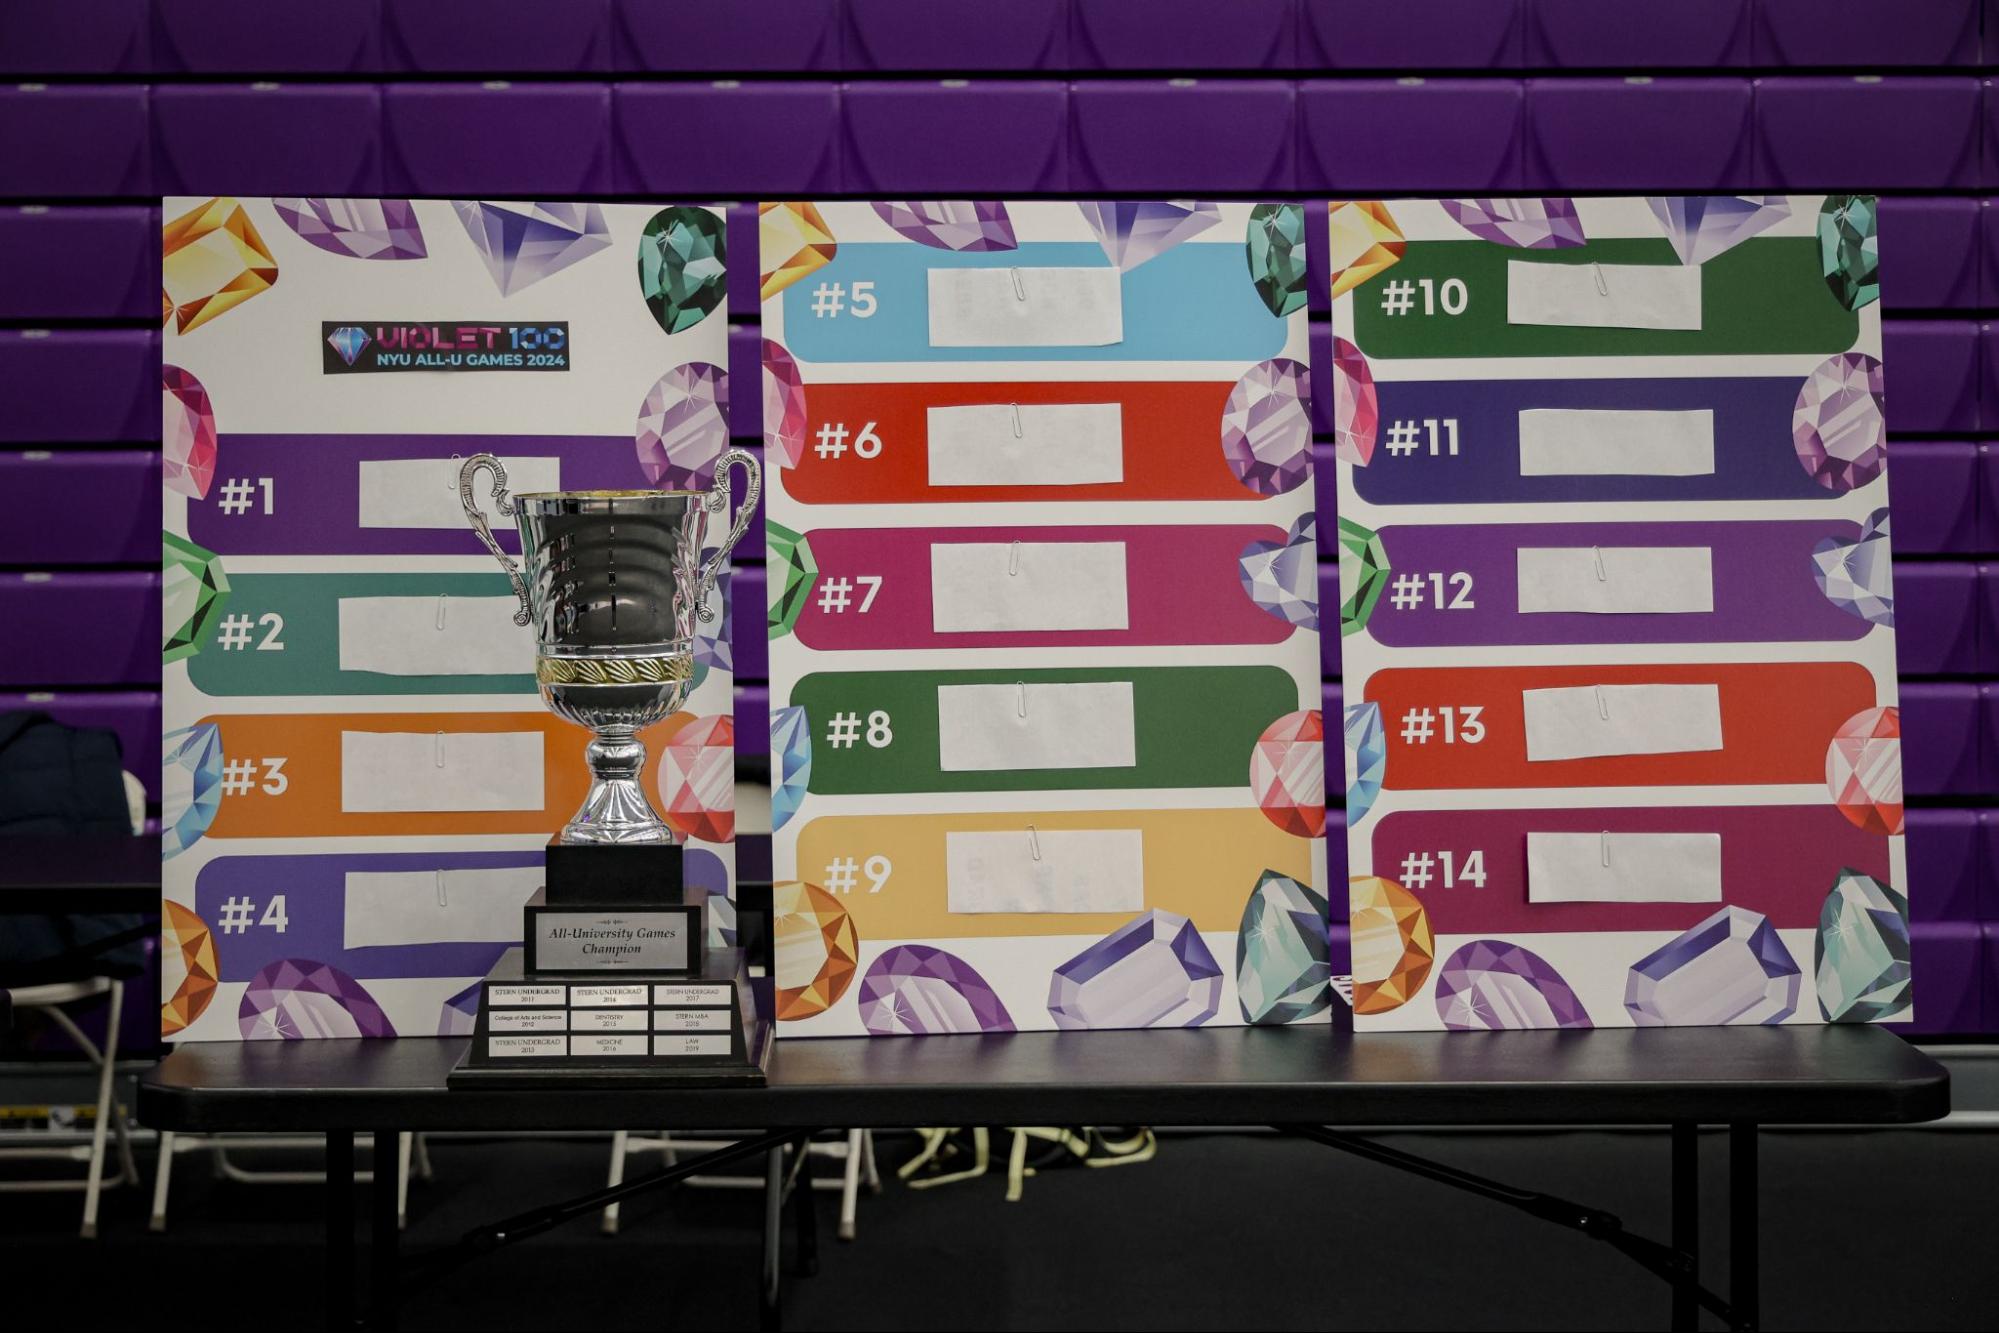 A large silver trophy is displayed on a table in front of three blank scorecards titled “VIOLET 100: N.Y.U. ALL-U GAMES 2024.” The trophy is engraved with “All-University Games Champion.”